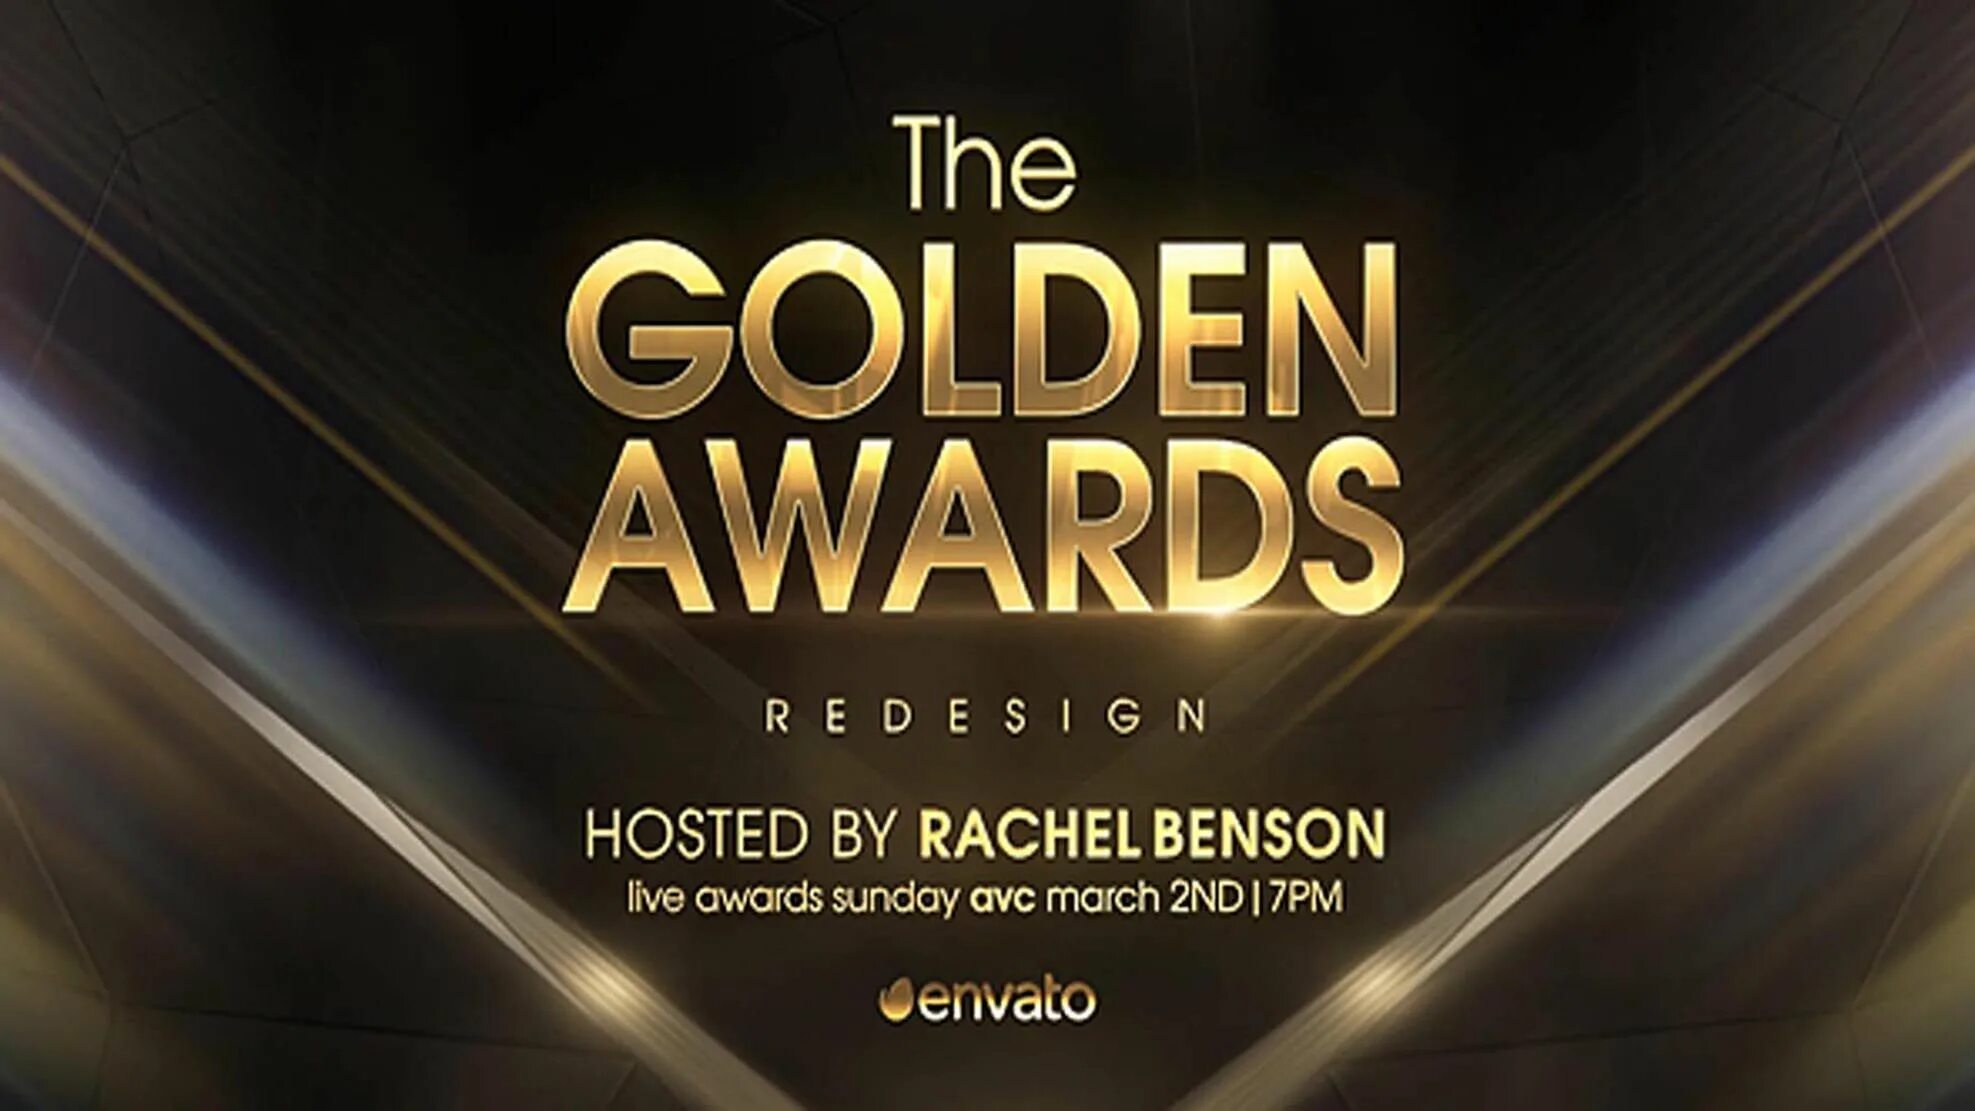 Awards after Effects Projects. Gold Award. Award Opener 223656 - after Effects Project. Videohive Gold.